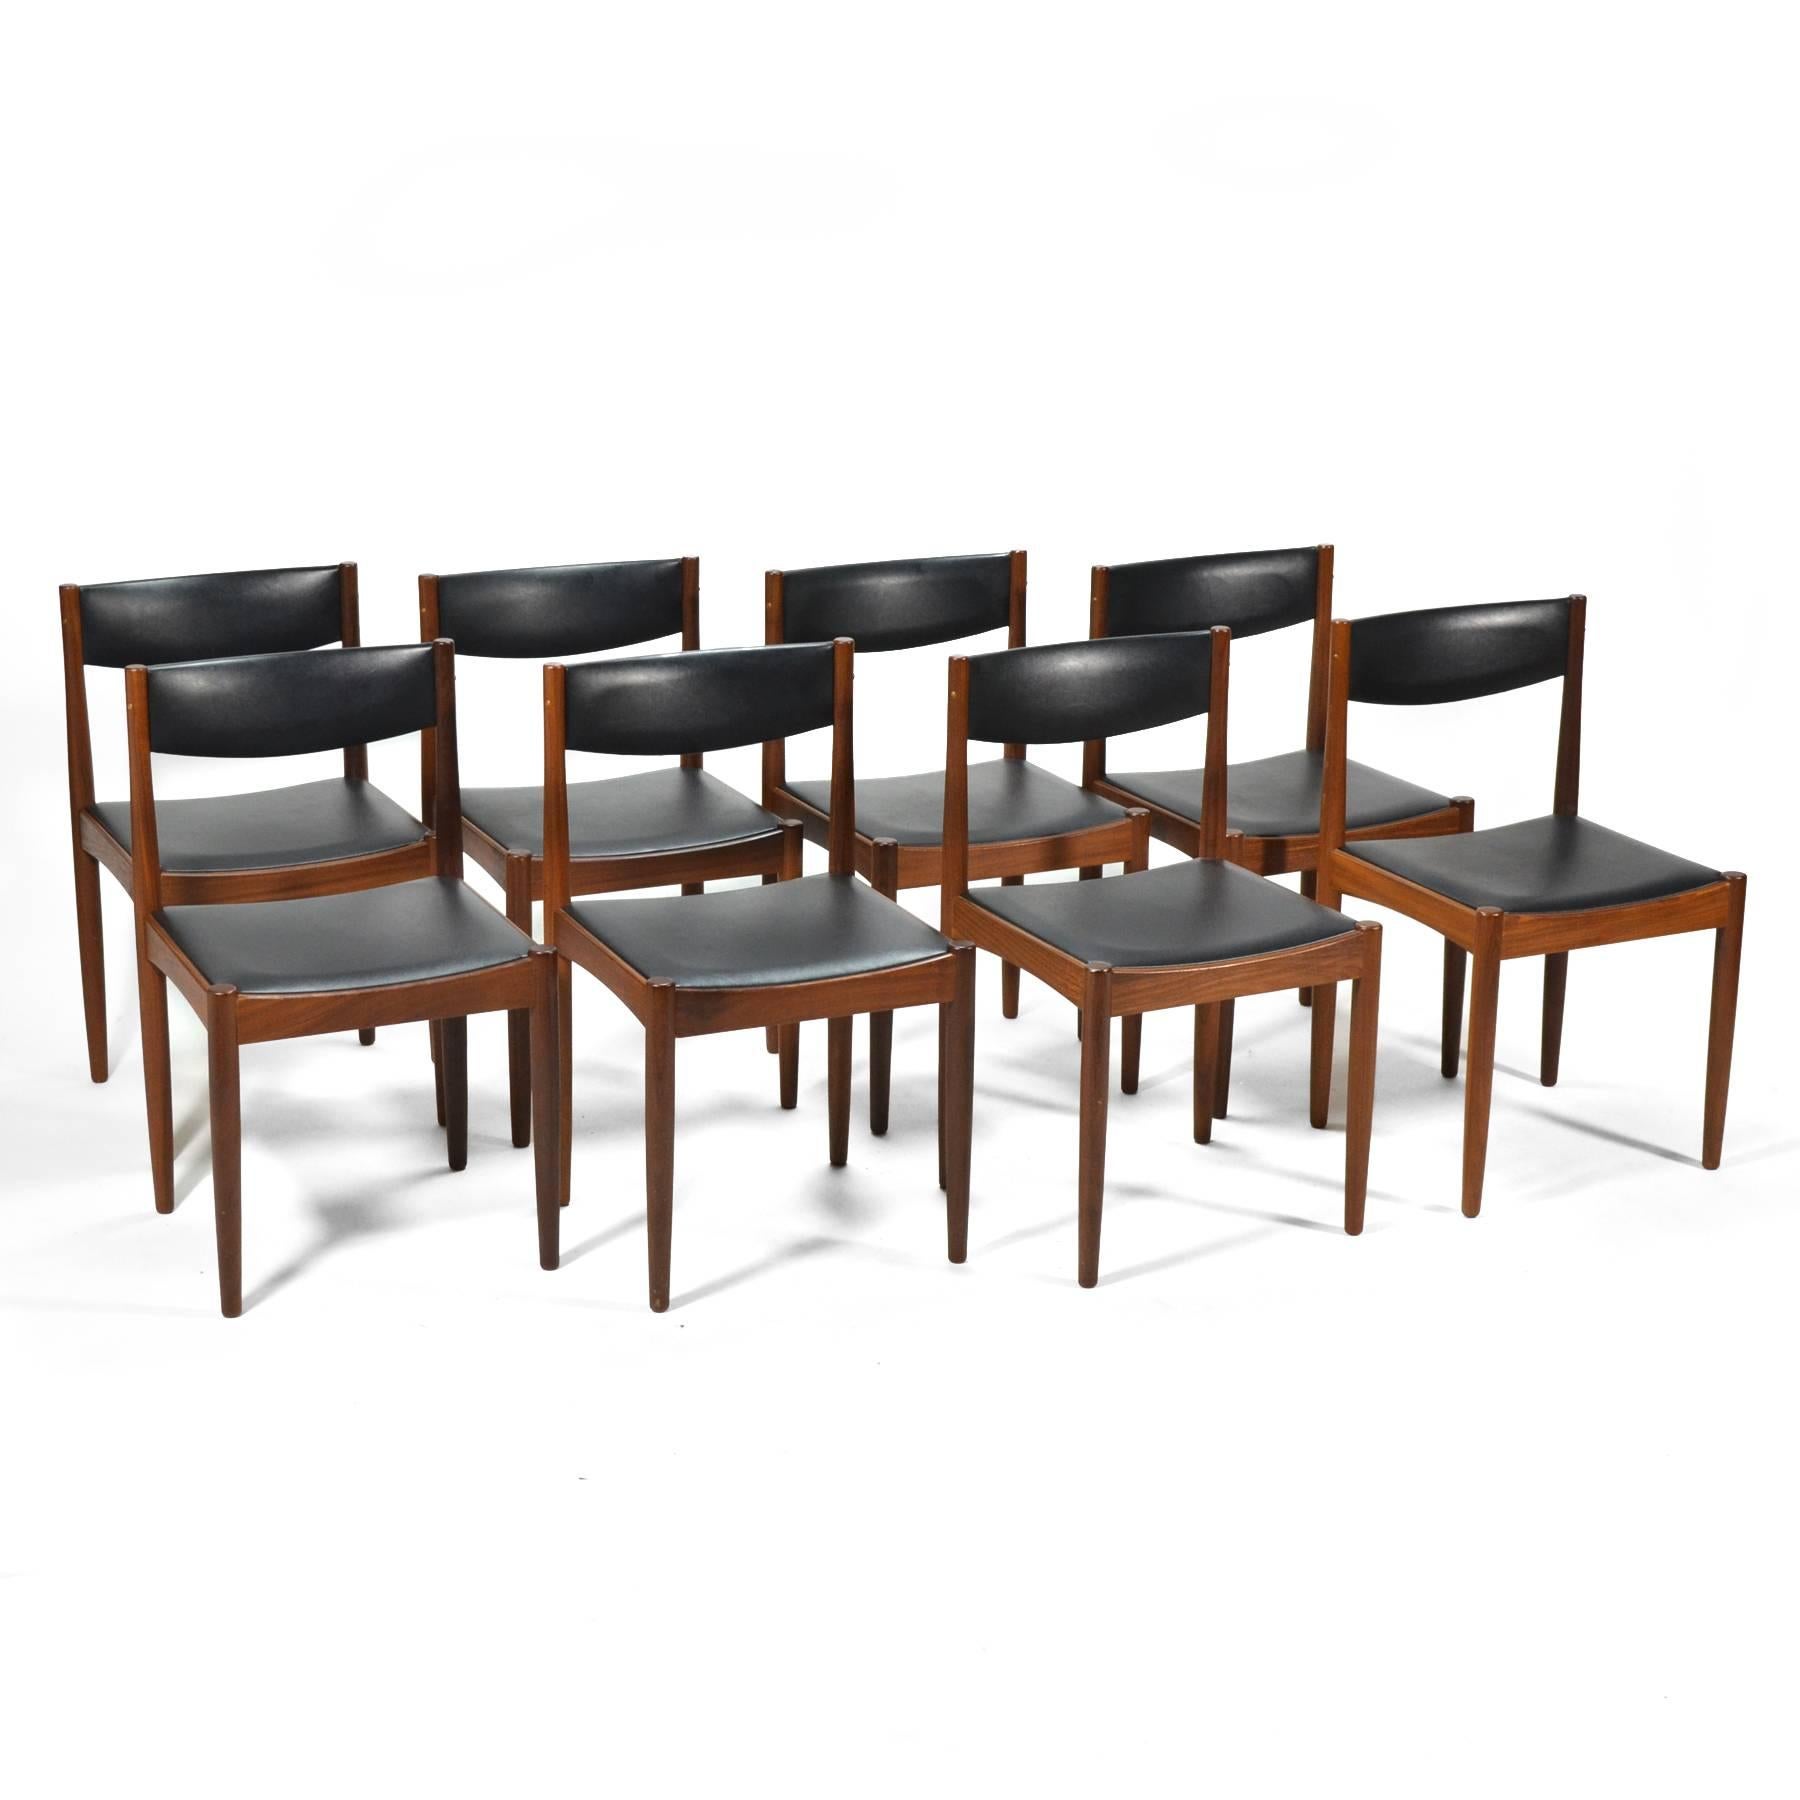 This stately set of eight dining chairs by Poul Volther have wonderful, understated details and exhibit the influence that Shaker furniture had on Scandinavian designers of the Mid-Century.